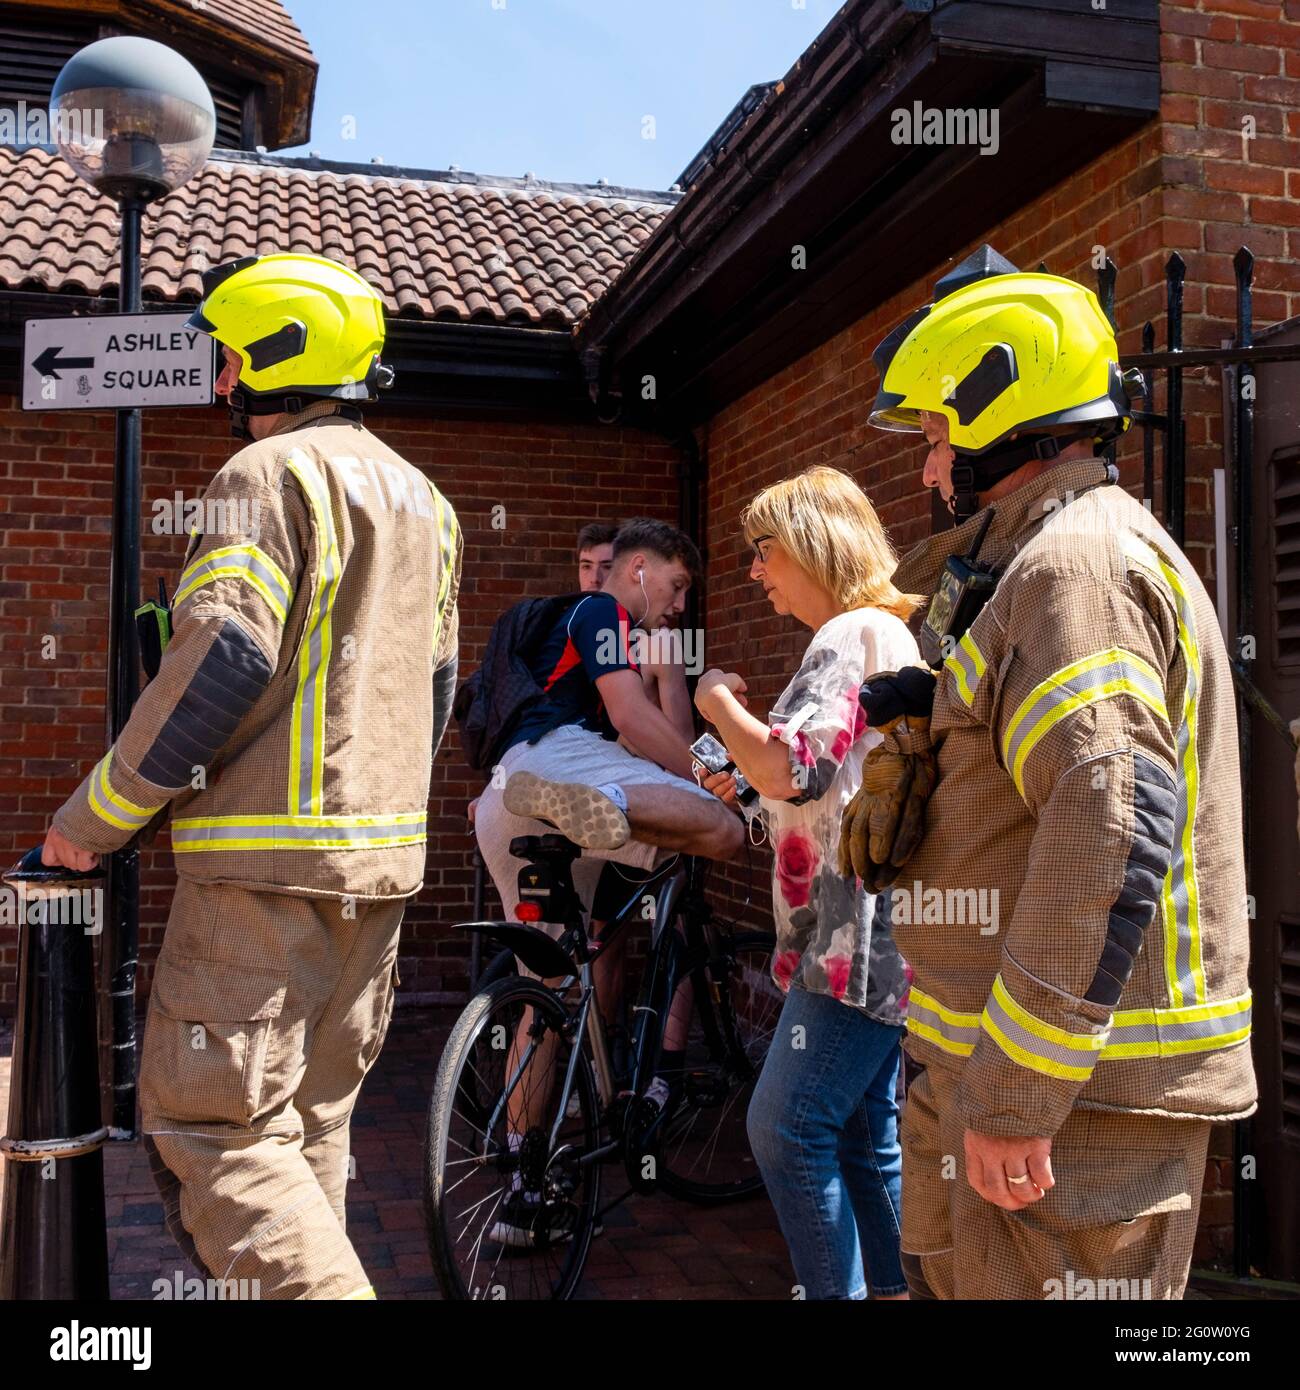 Epsom Surrey London UK, June 03 2021, Two Firemen Or Firefighters Dressed In Safety Clothing Stock Photo